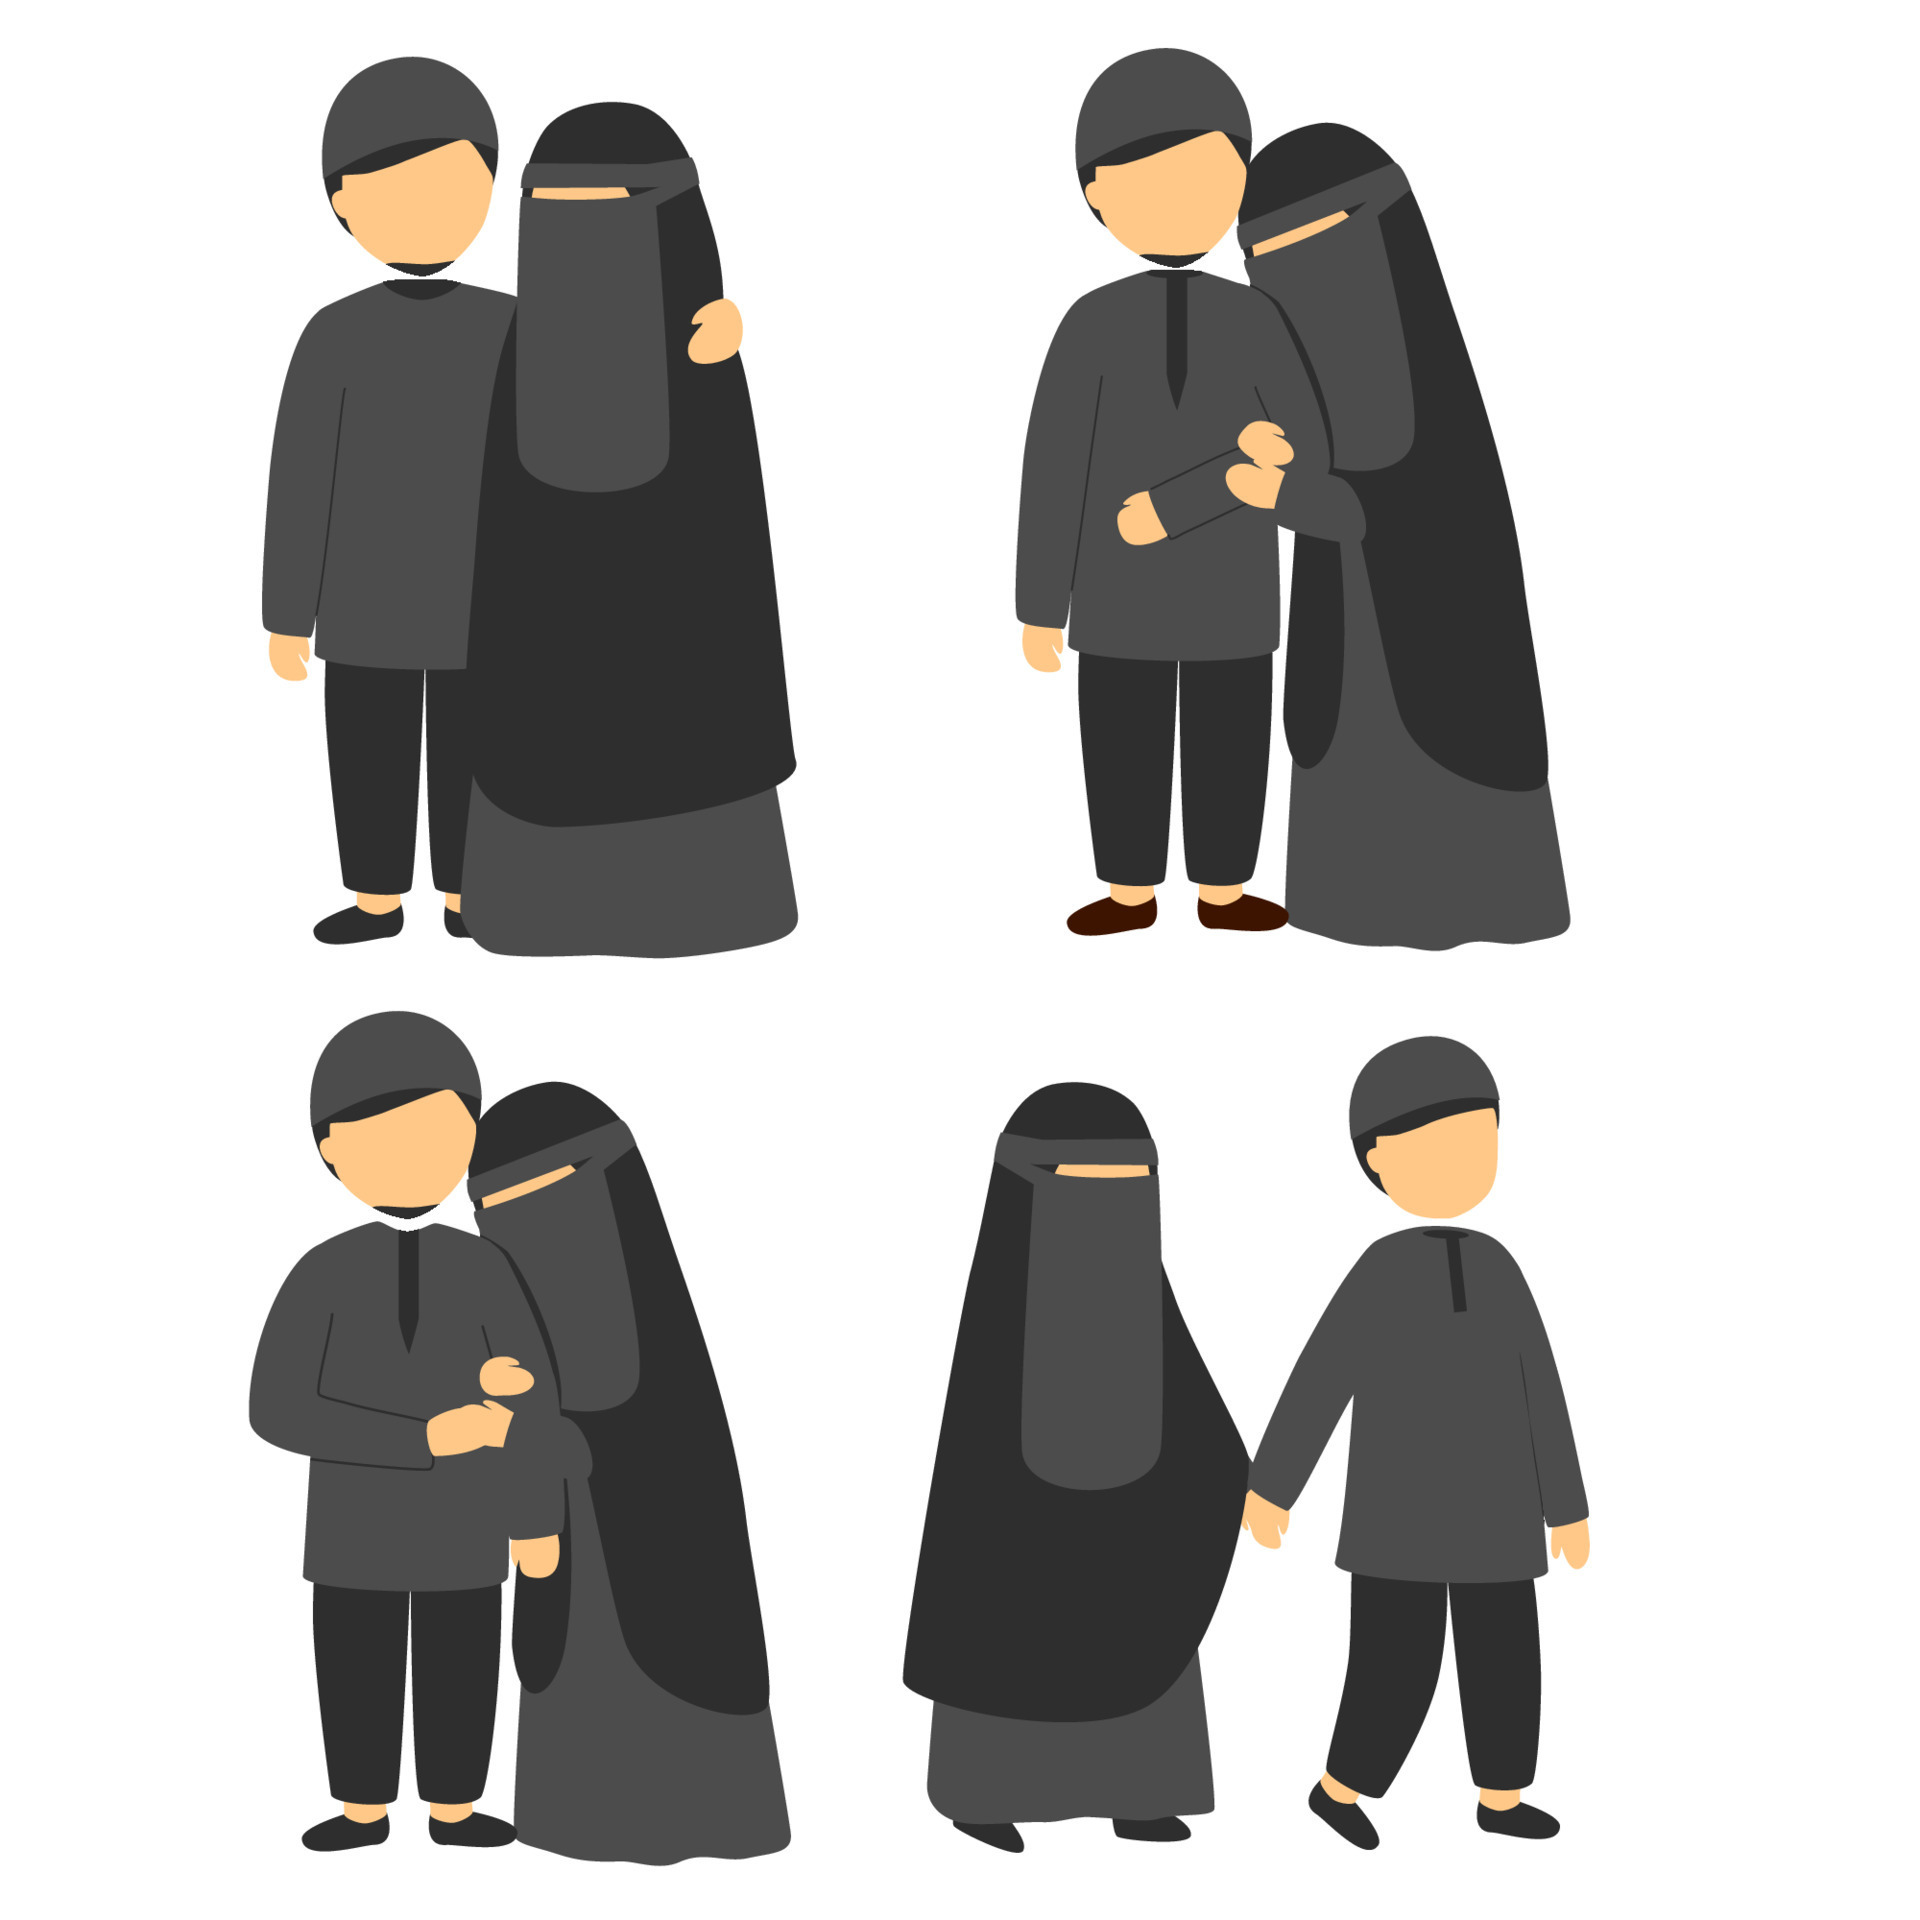 A Beautiful Muslim Couple Illustration Wallpaper With Pastel Gray  Background Wallpaper Image For Free Download - Pngtree